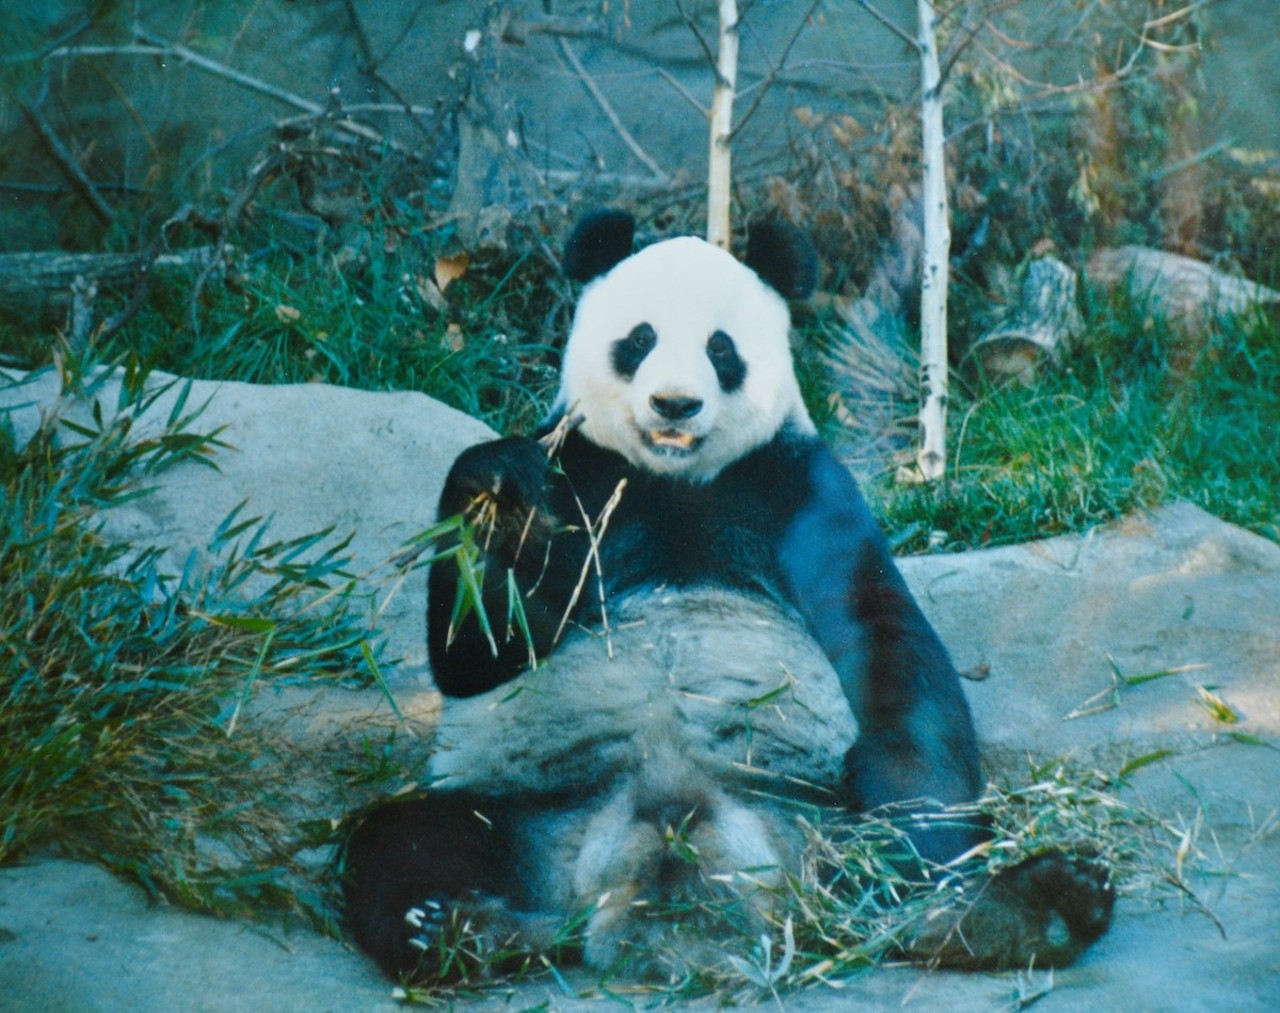 Panda at the Cincinnati Zoo, 1988
In 1988, the Cincinnati Zoo & Botanical Gardens hosted a visiting panda bear, Chia Chia, who was stopping over for three months when he was being moved from a zoo in London to one in Mexico City, according to an article from the New York Times at the time. After his arrival, the zoo had to close the exhibit for at least five days because Chia Chia was homesick. Chia Chia left the zoo at the end of November that year, and while the zoo said his overall stay was a success, they were disappointed he didn't generate more money and crowds, according to this 1988 article.